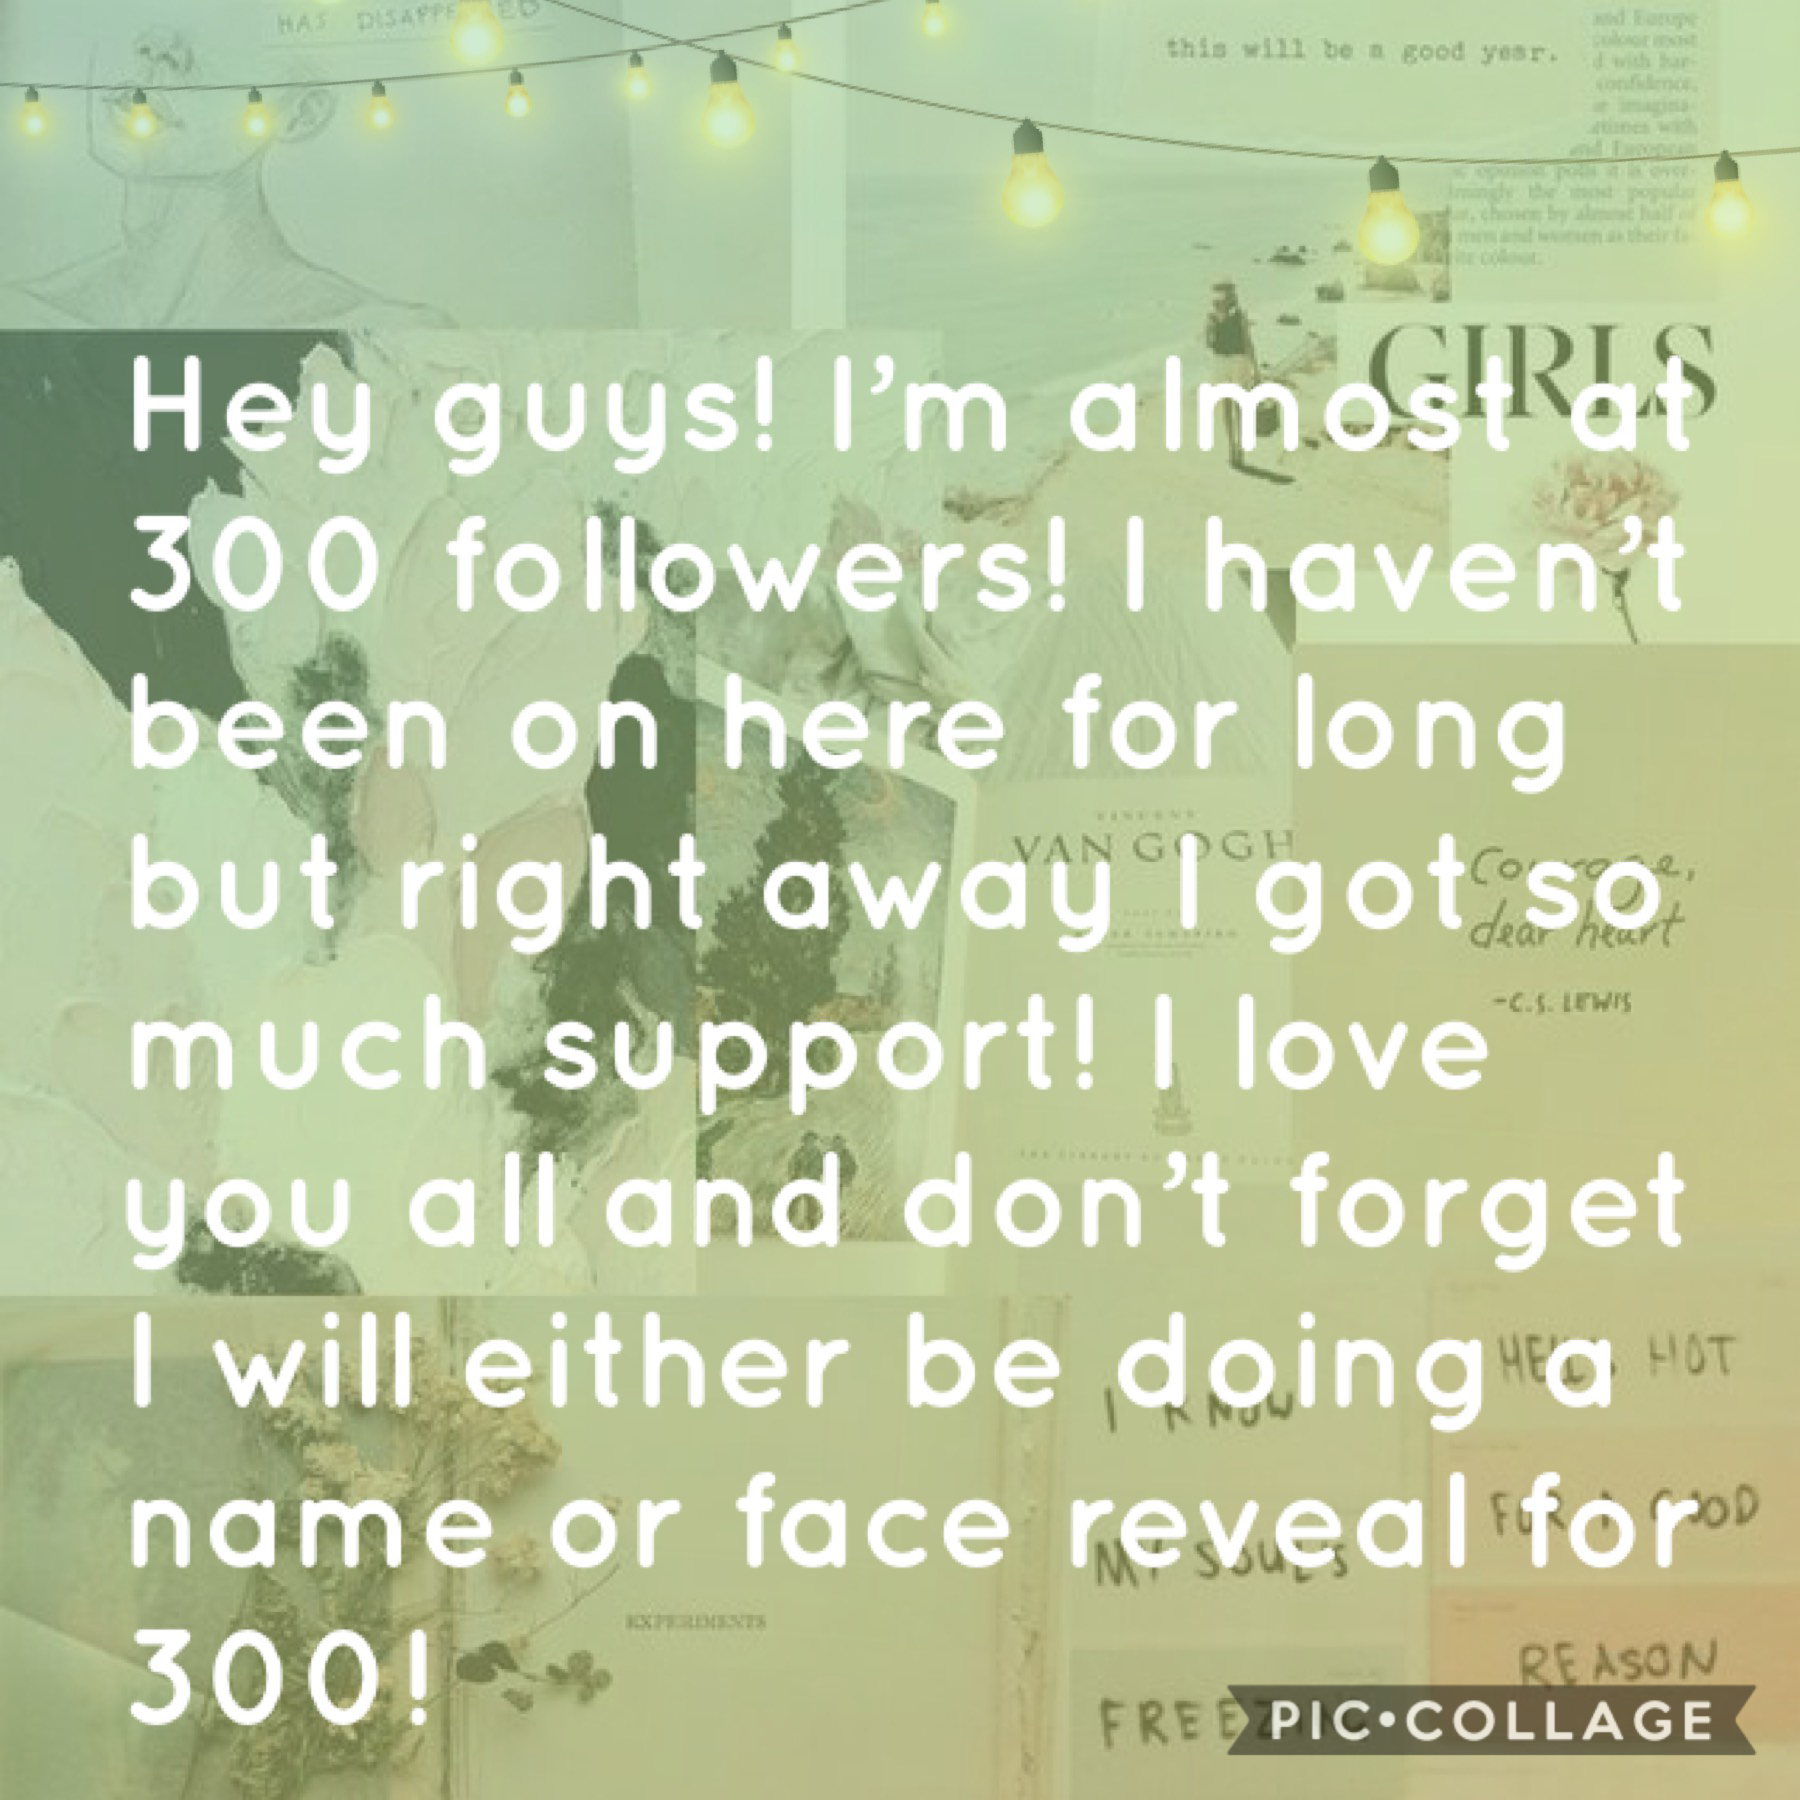 🎉 Tap🎉

I can’t believe I’m almost at 300! Thank you all so much ❤️